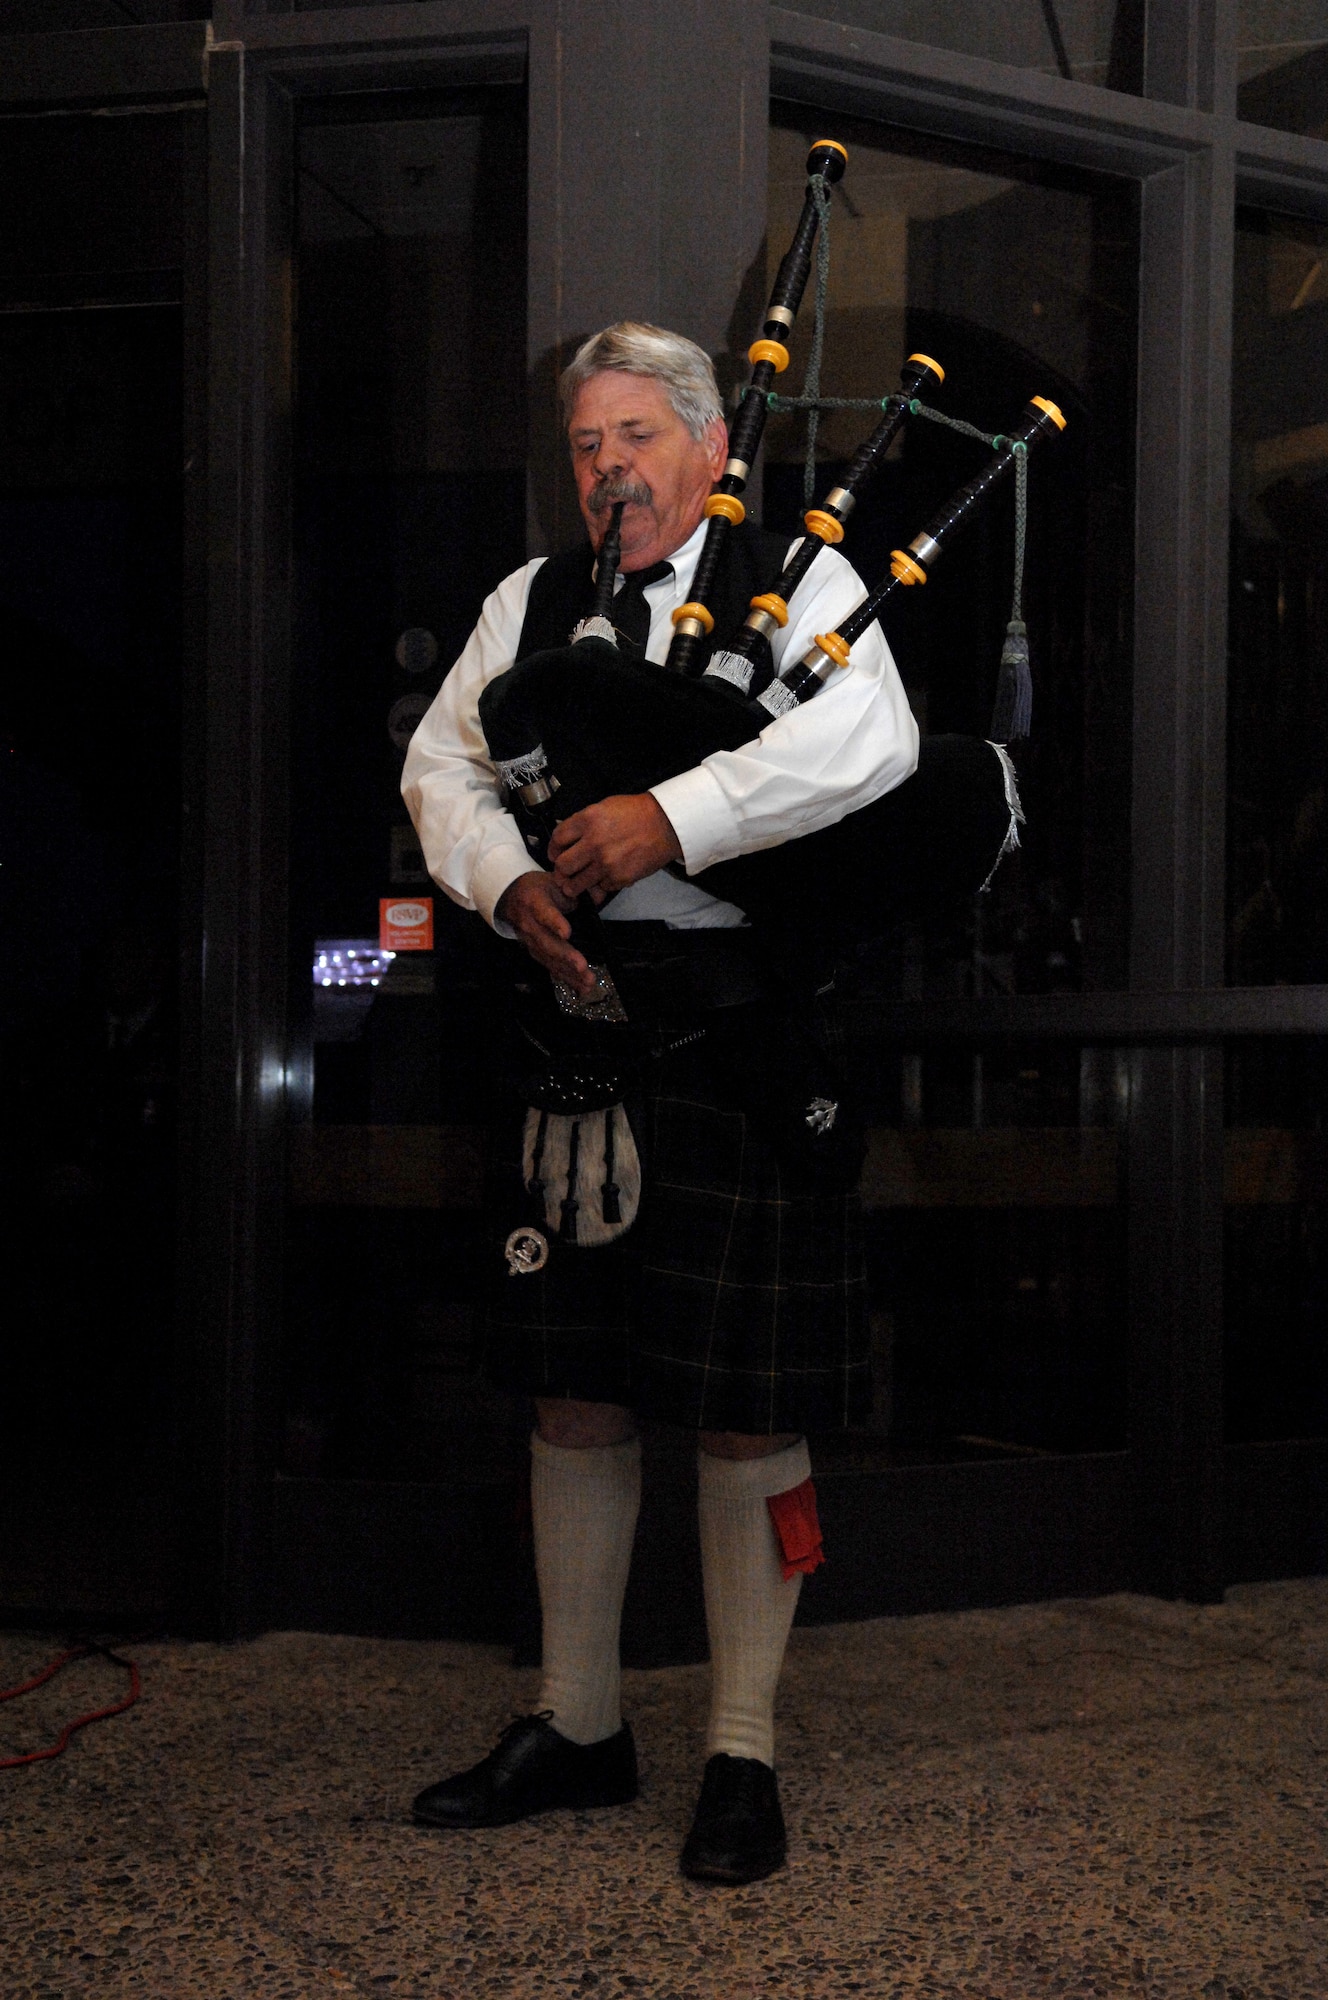 Mr. William Meacher, of Empyre Pipes and Drums, plays ?Amazing Grace? on his bagpipes during the candle-lighting ceremony at the seventh annual 9/11 Memorial Ceremony at the New Mexico Museum of Space History, September 11. The event was put together by the Fire Department of Holloman Air Force Base, N.M., and the Otero County Firefighters Assocation. (U.S. Air Force photo/Airman Sondra M. Escutia)